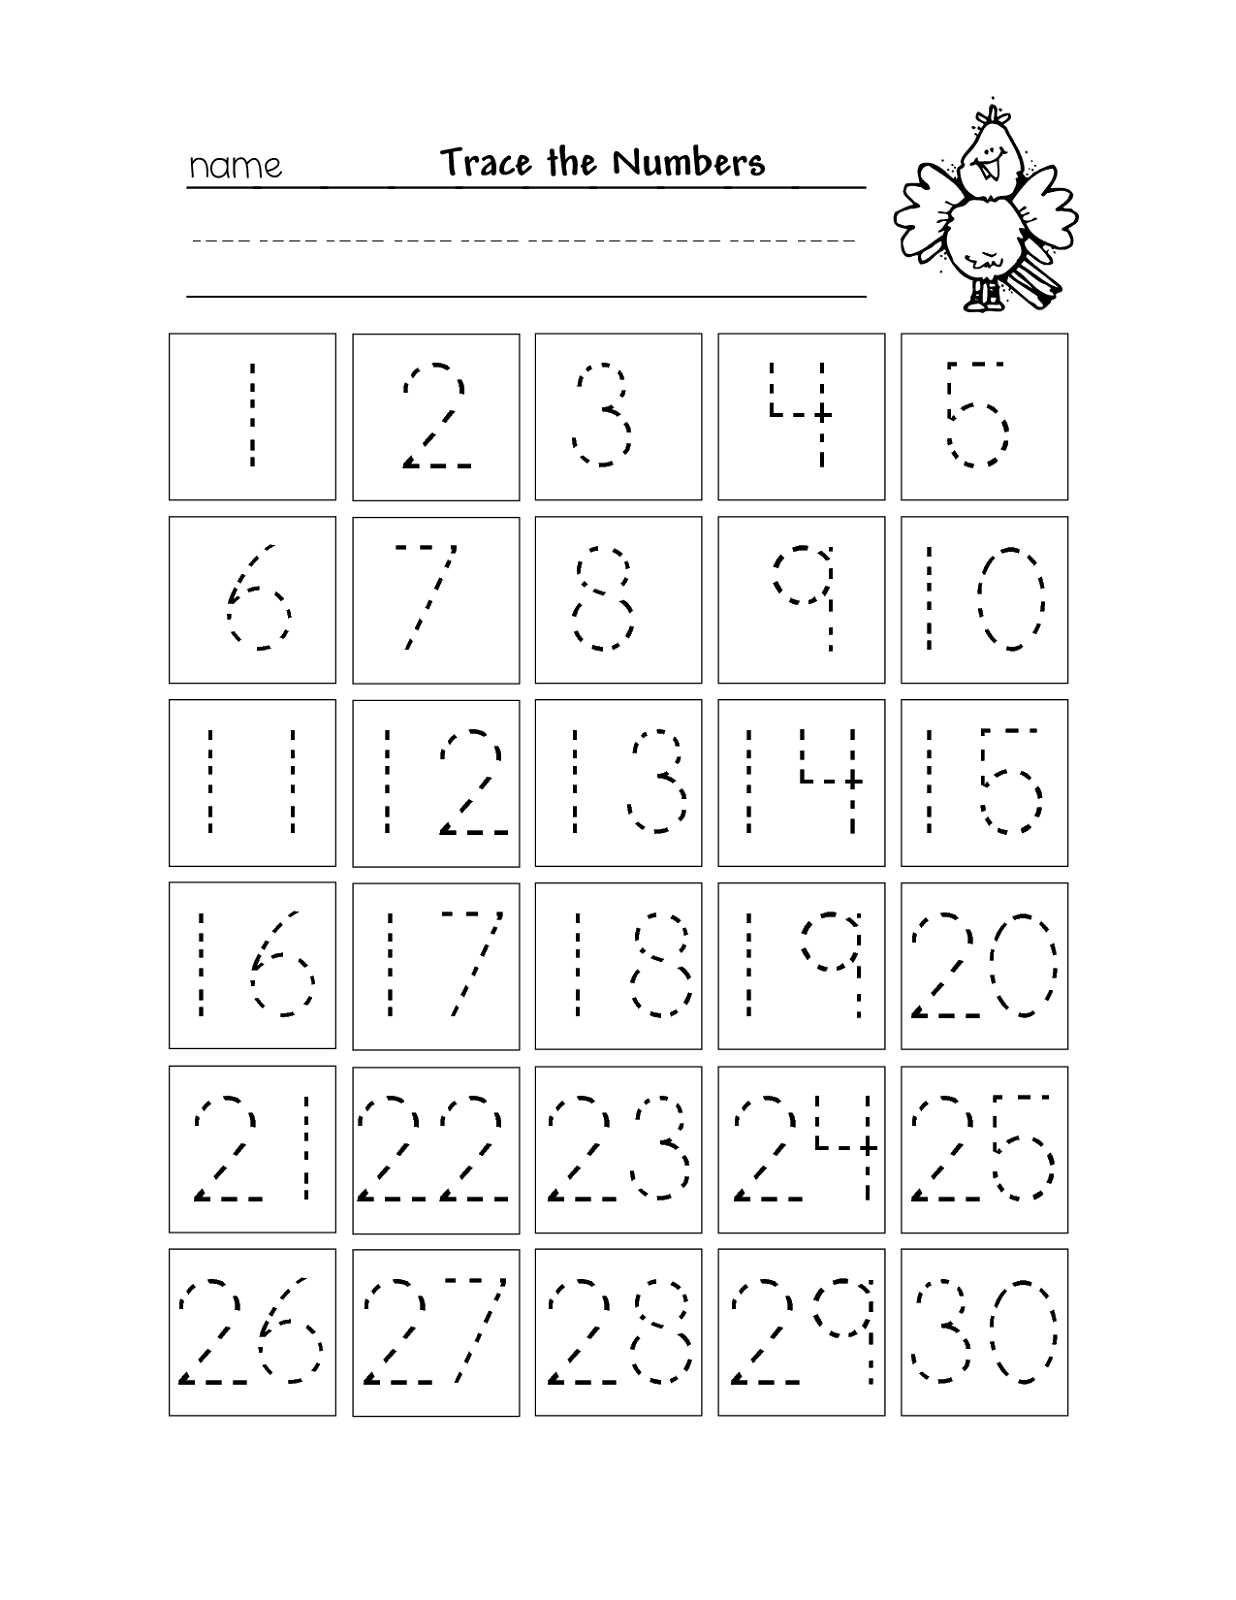 Number Writing Practice Worksheets Along with Trace the Numbers 1 30 Kiddo Shelter